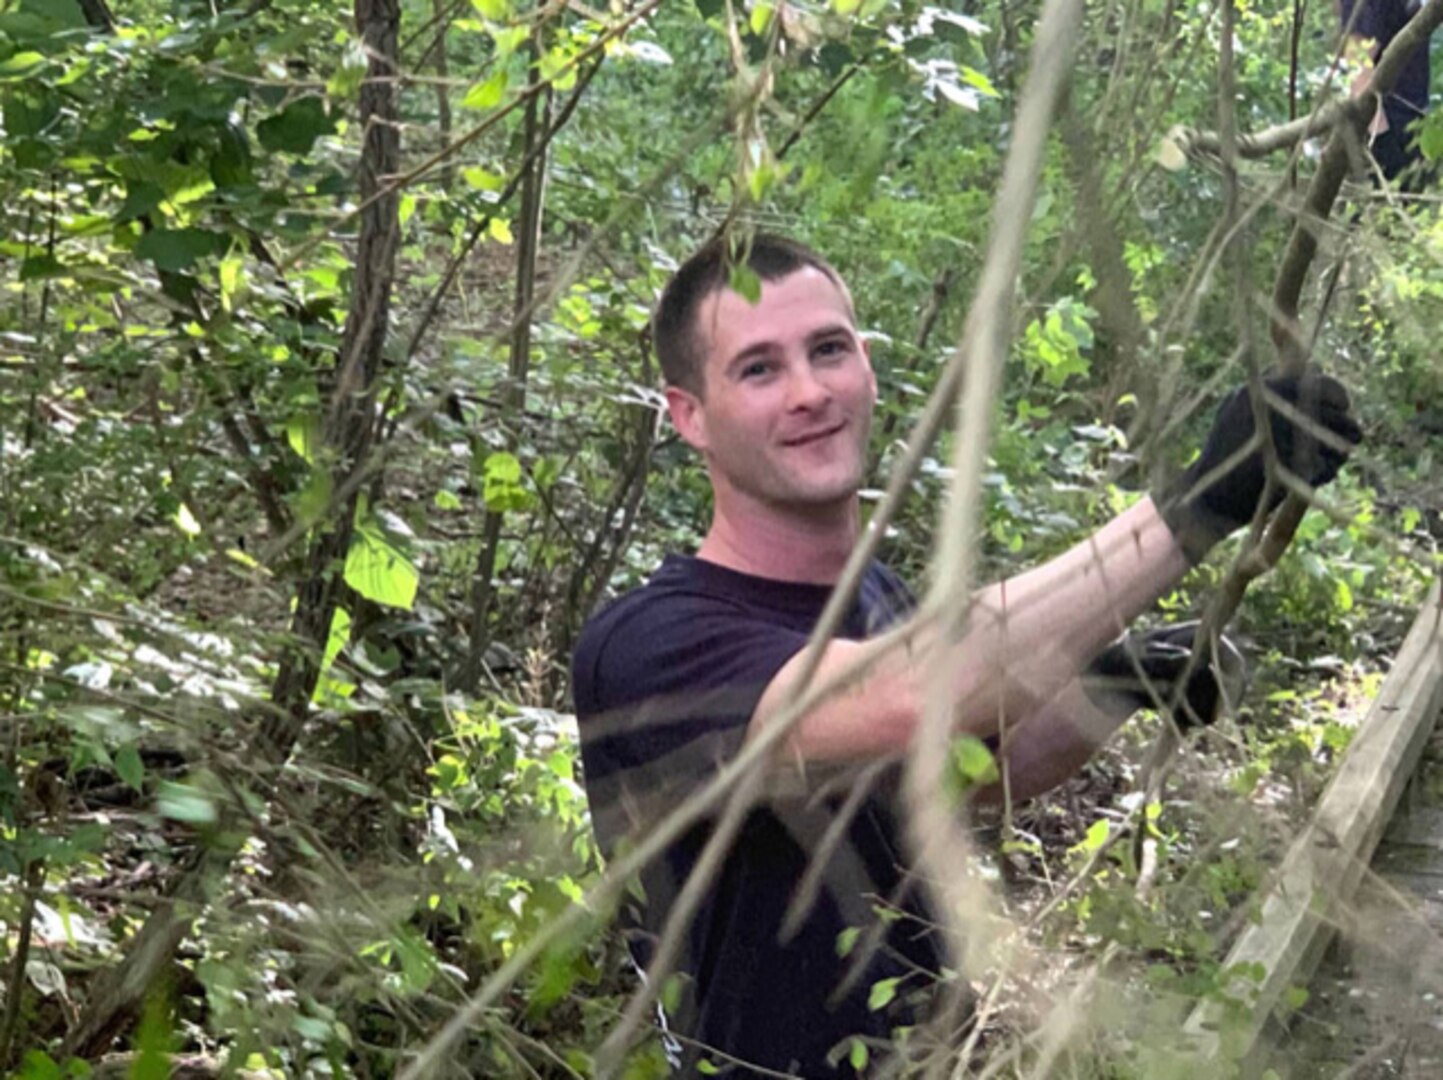 Forty-nine Airmen with the 124th Intelligence Squadron (IS) helped restore the Reed Creek Nature Park to its natural beauty during annual training June 13, 2019, at Fort Gordon, Georgia. Airmen cleared more than an acre of land of an invasive species, Chinese Privet, which threatened the natural habitat's native species.